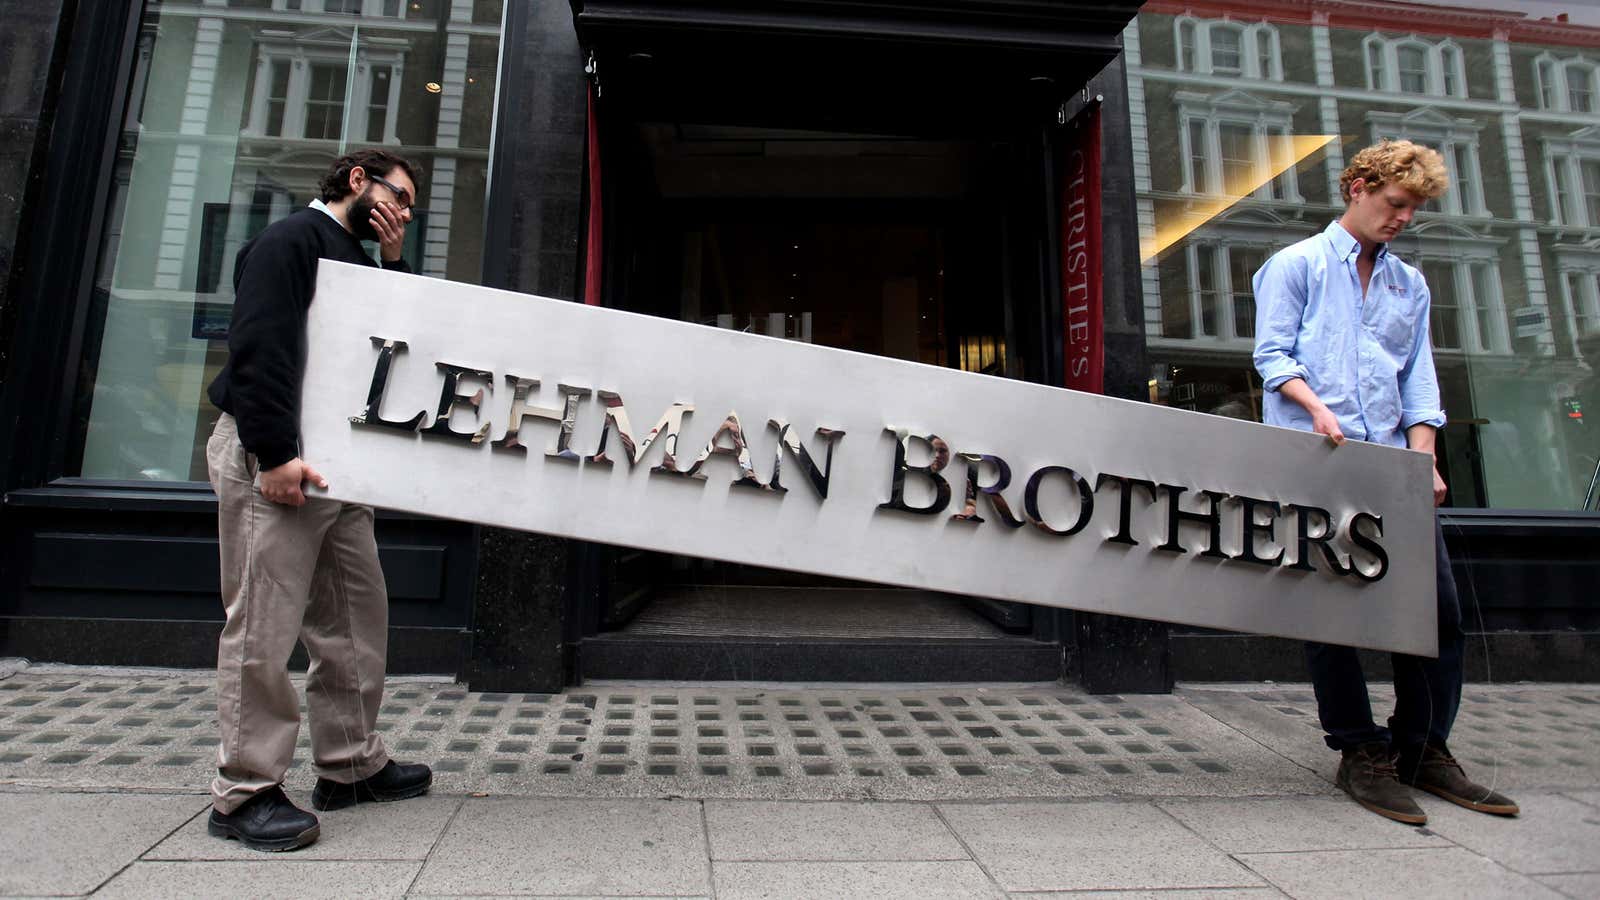 Four years after Lehman Brothers fell regulators start to crack down on banks